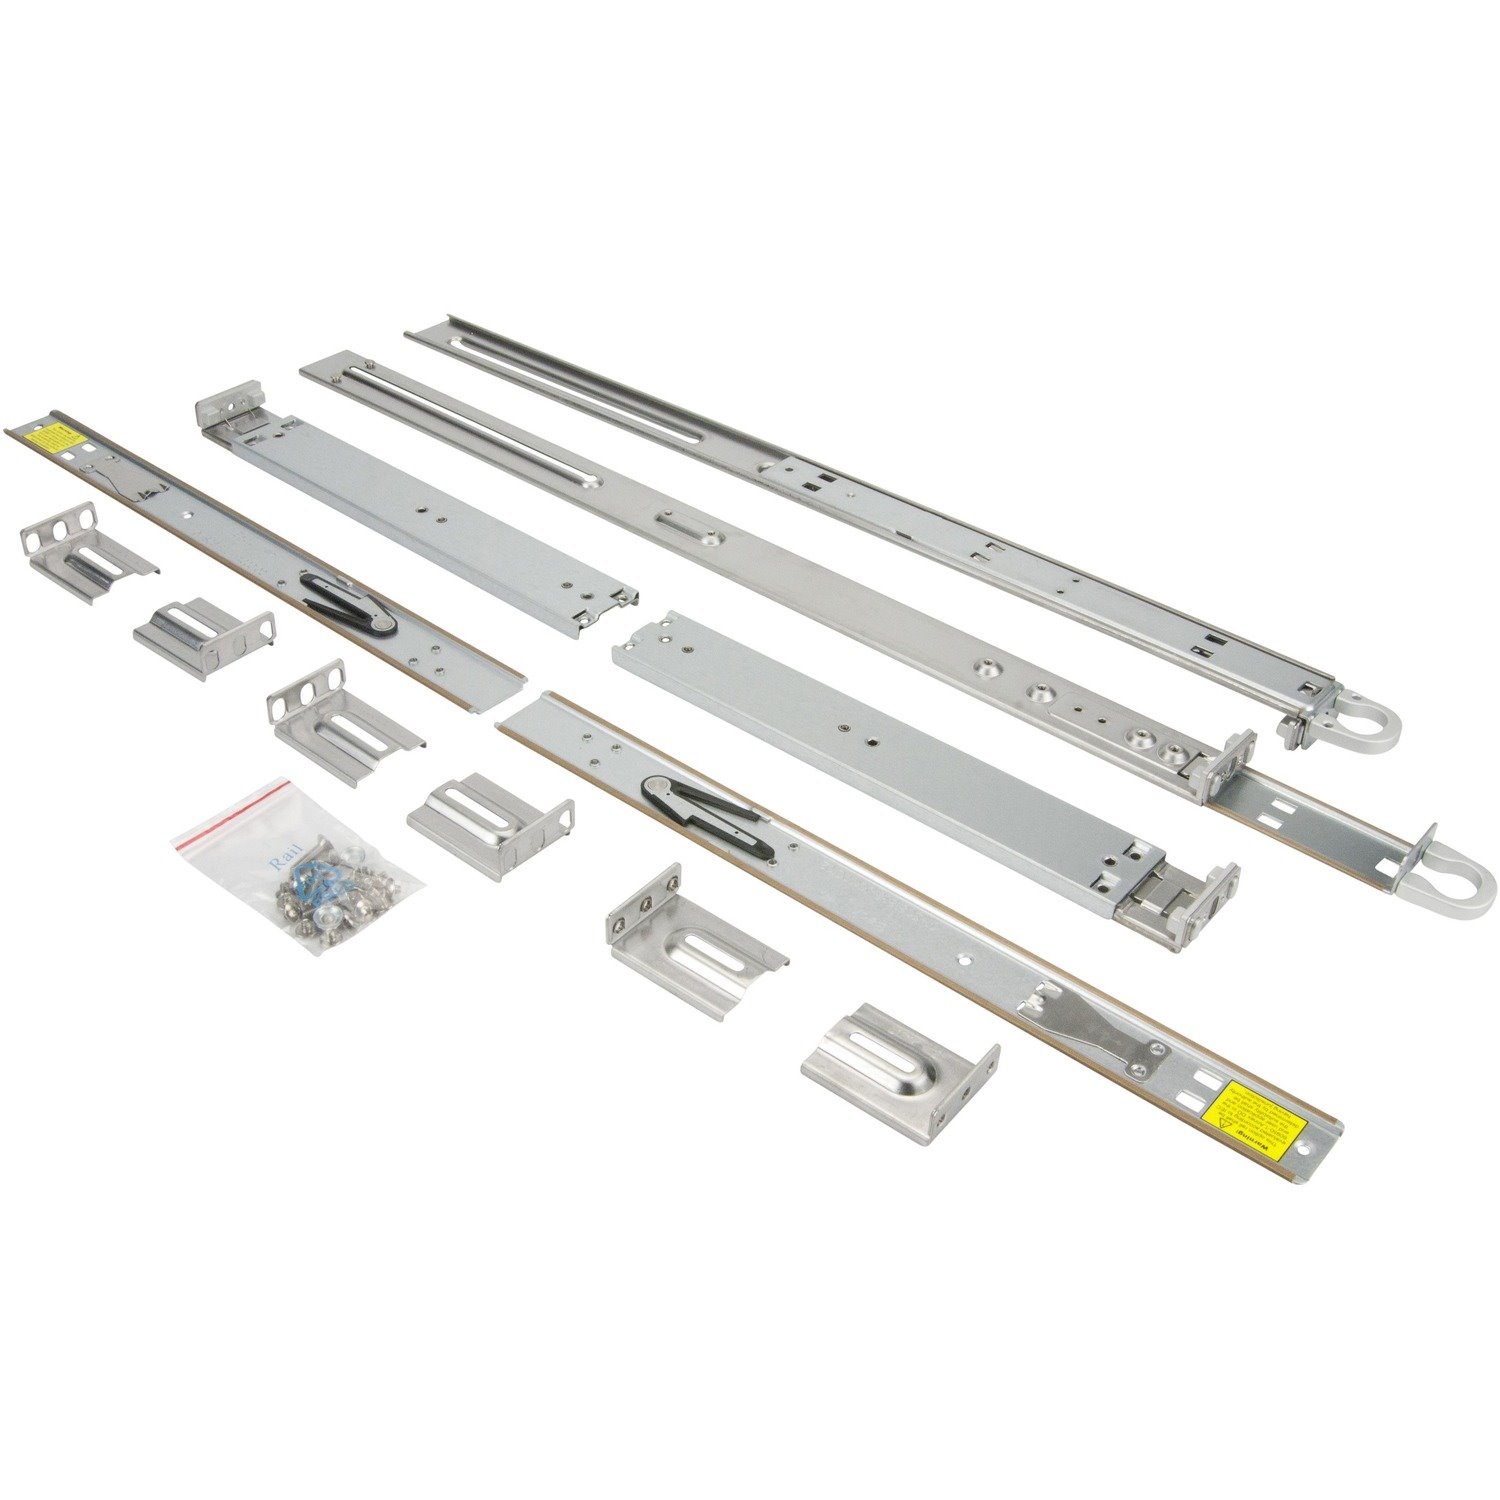 Supermicro Mounting Rail Kit for Chassis